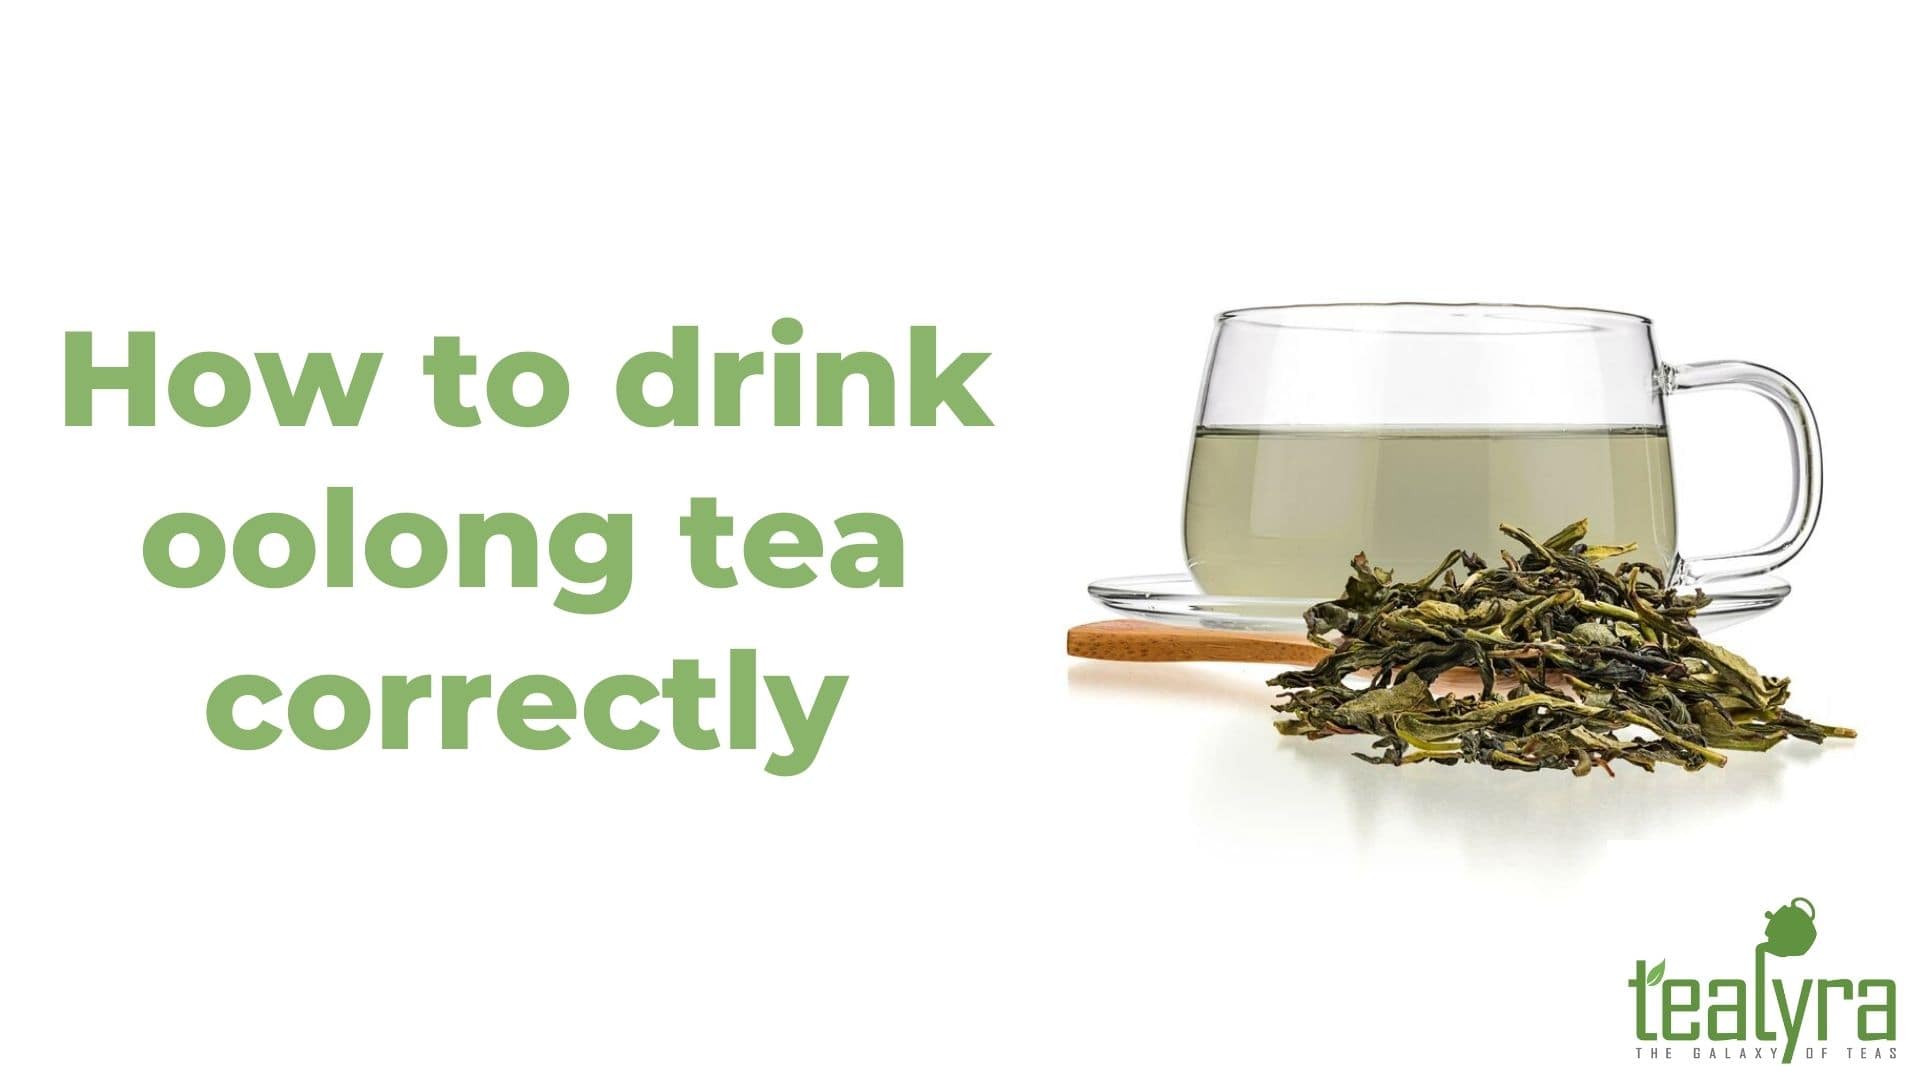 How-to-drink-oolong-tea-correctly